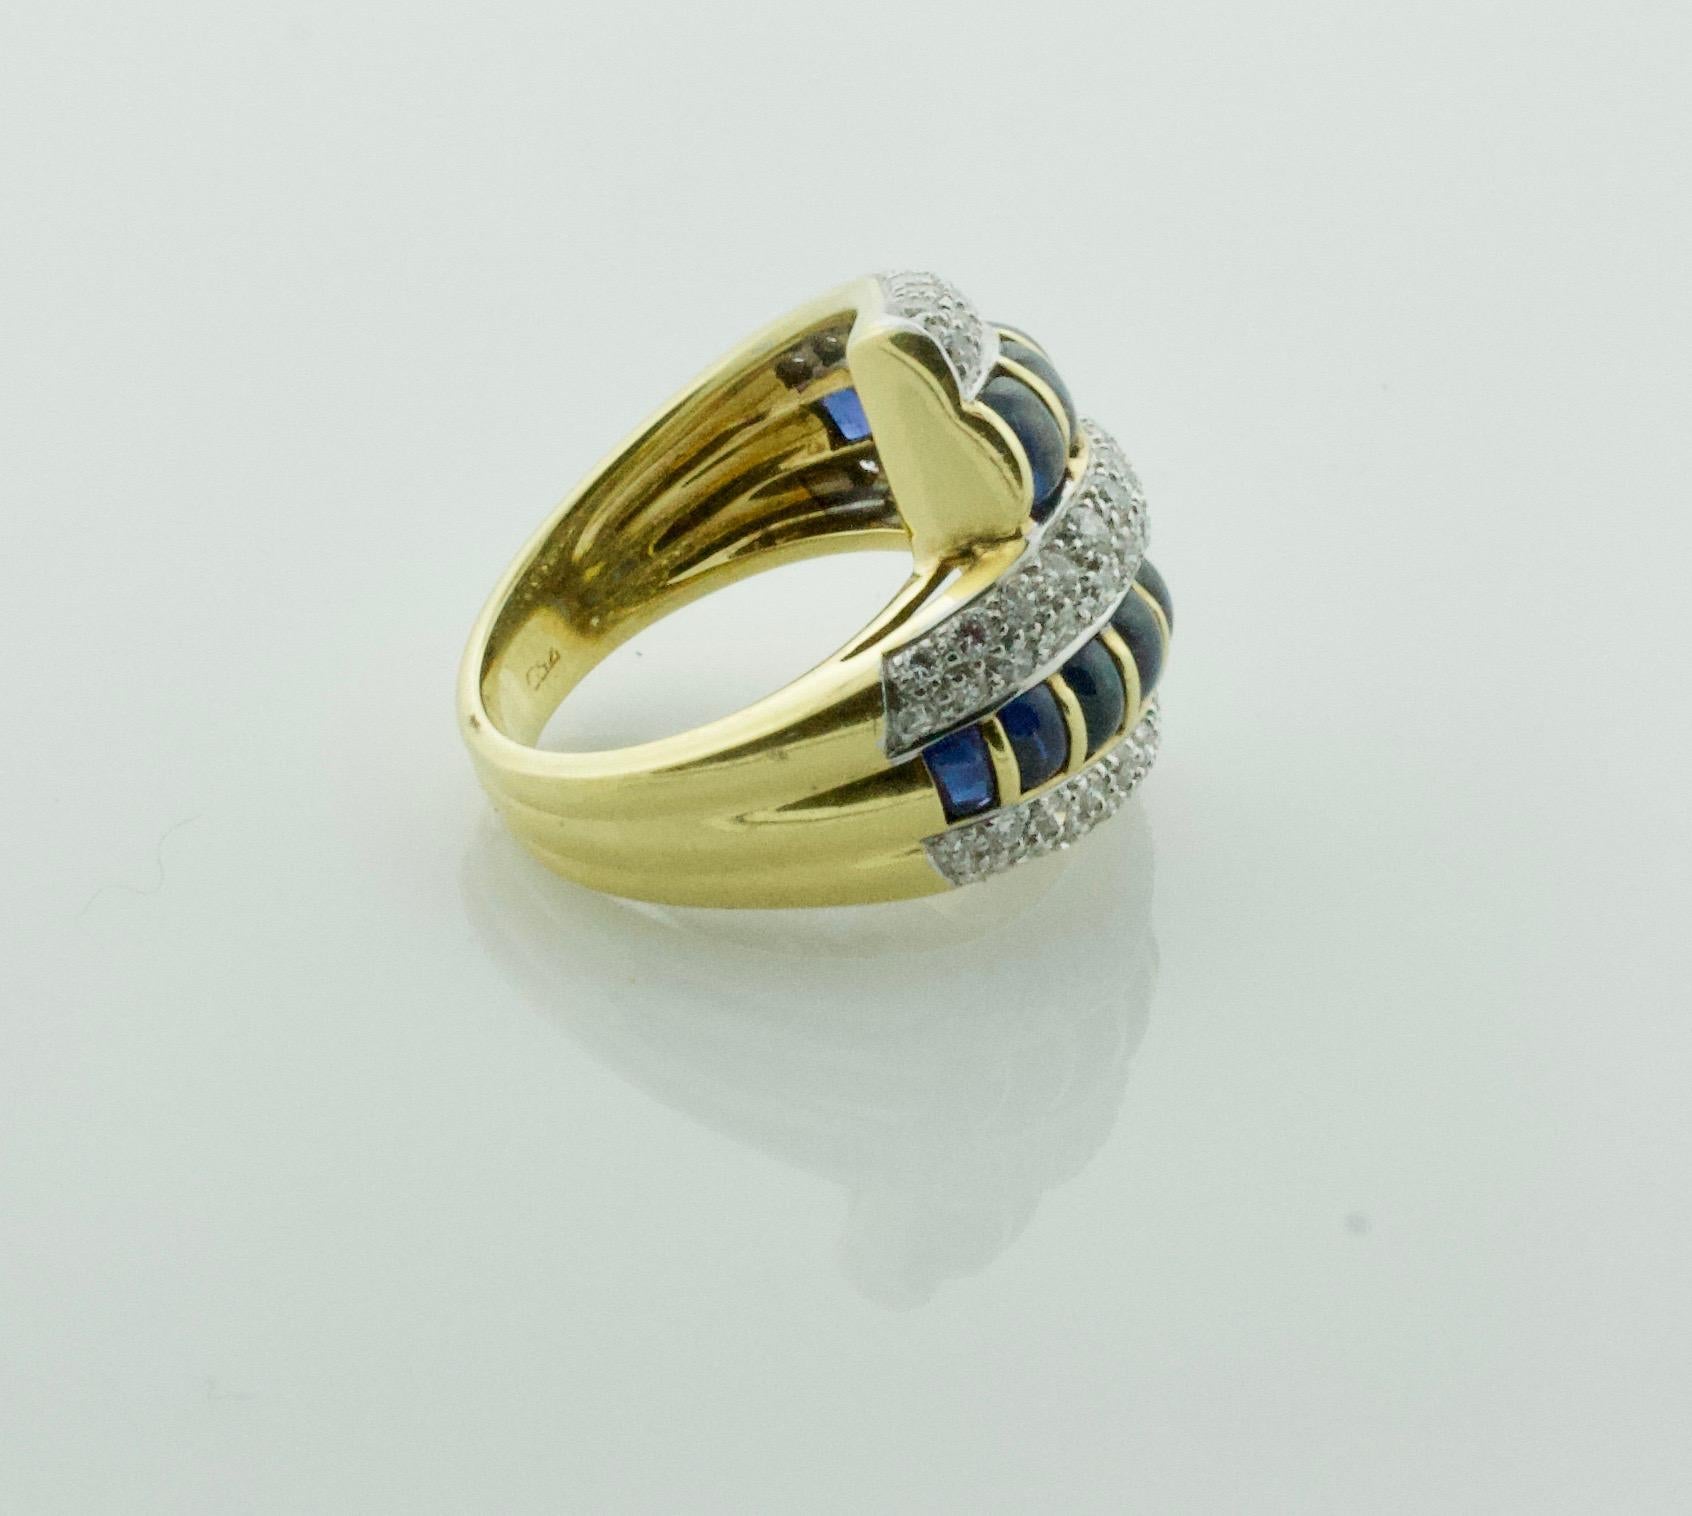 Cabochon Sapphire and Diamond Ring in 18 Karat Yellow Gold In Excellent Condition For Sale In Wailea, HI